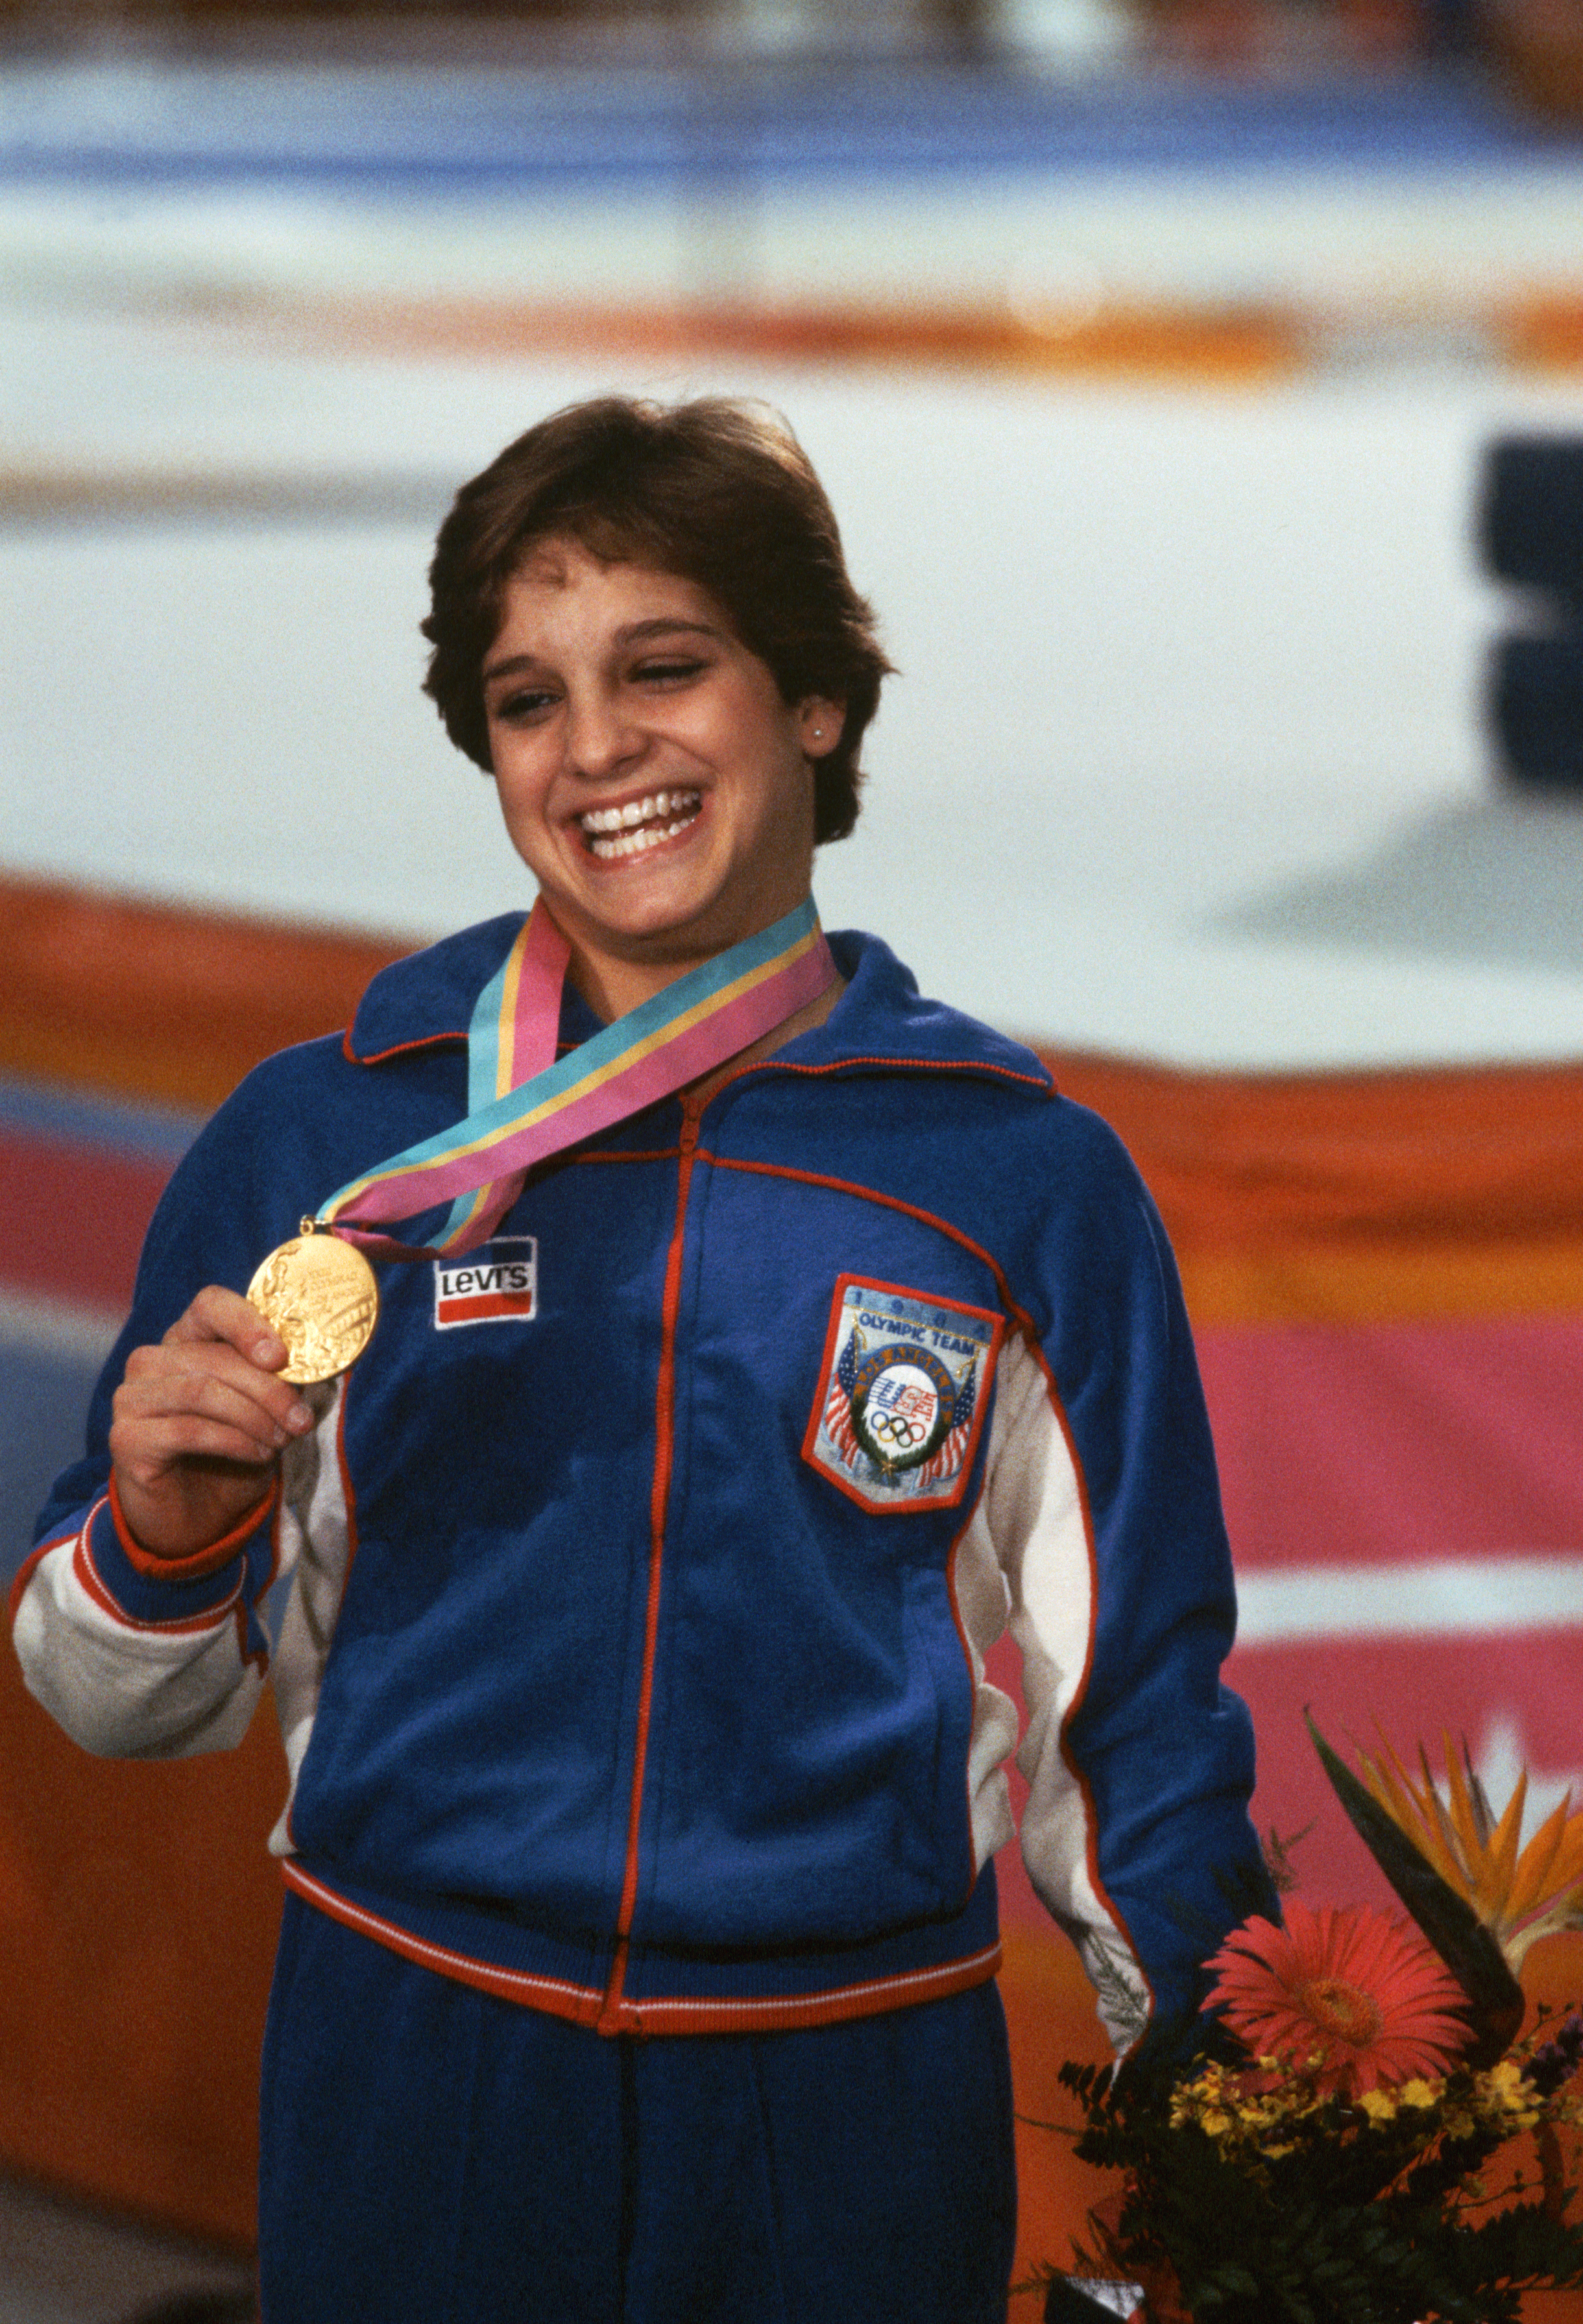 Mary Lou Retton poses with her Olympic medal in 1984 in Los Angeles, California | Source: Getty Images